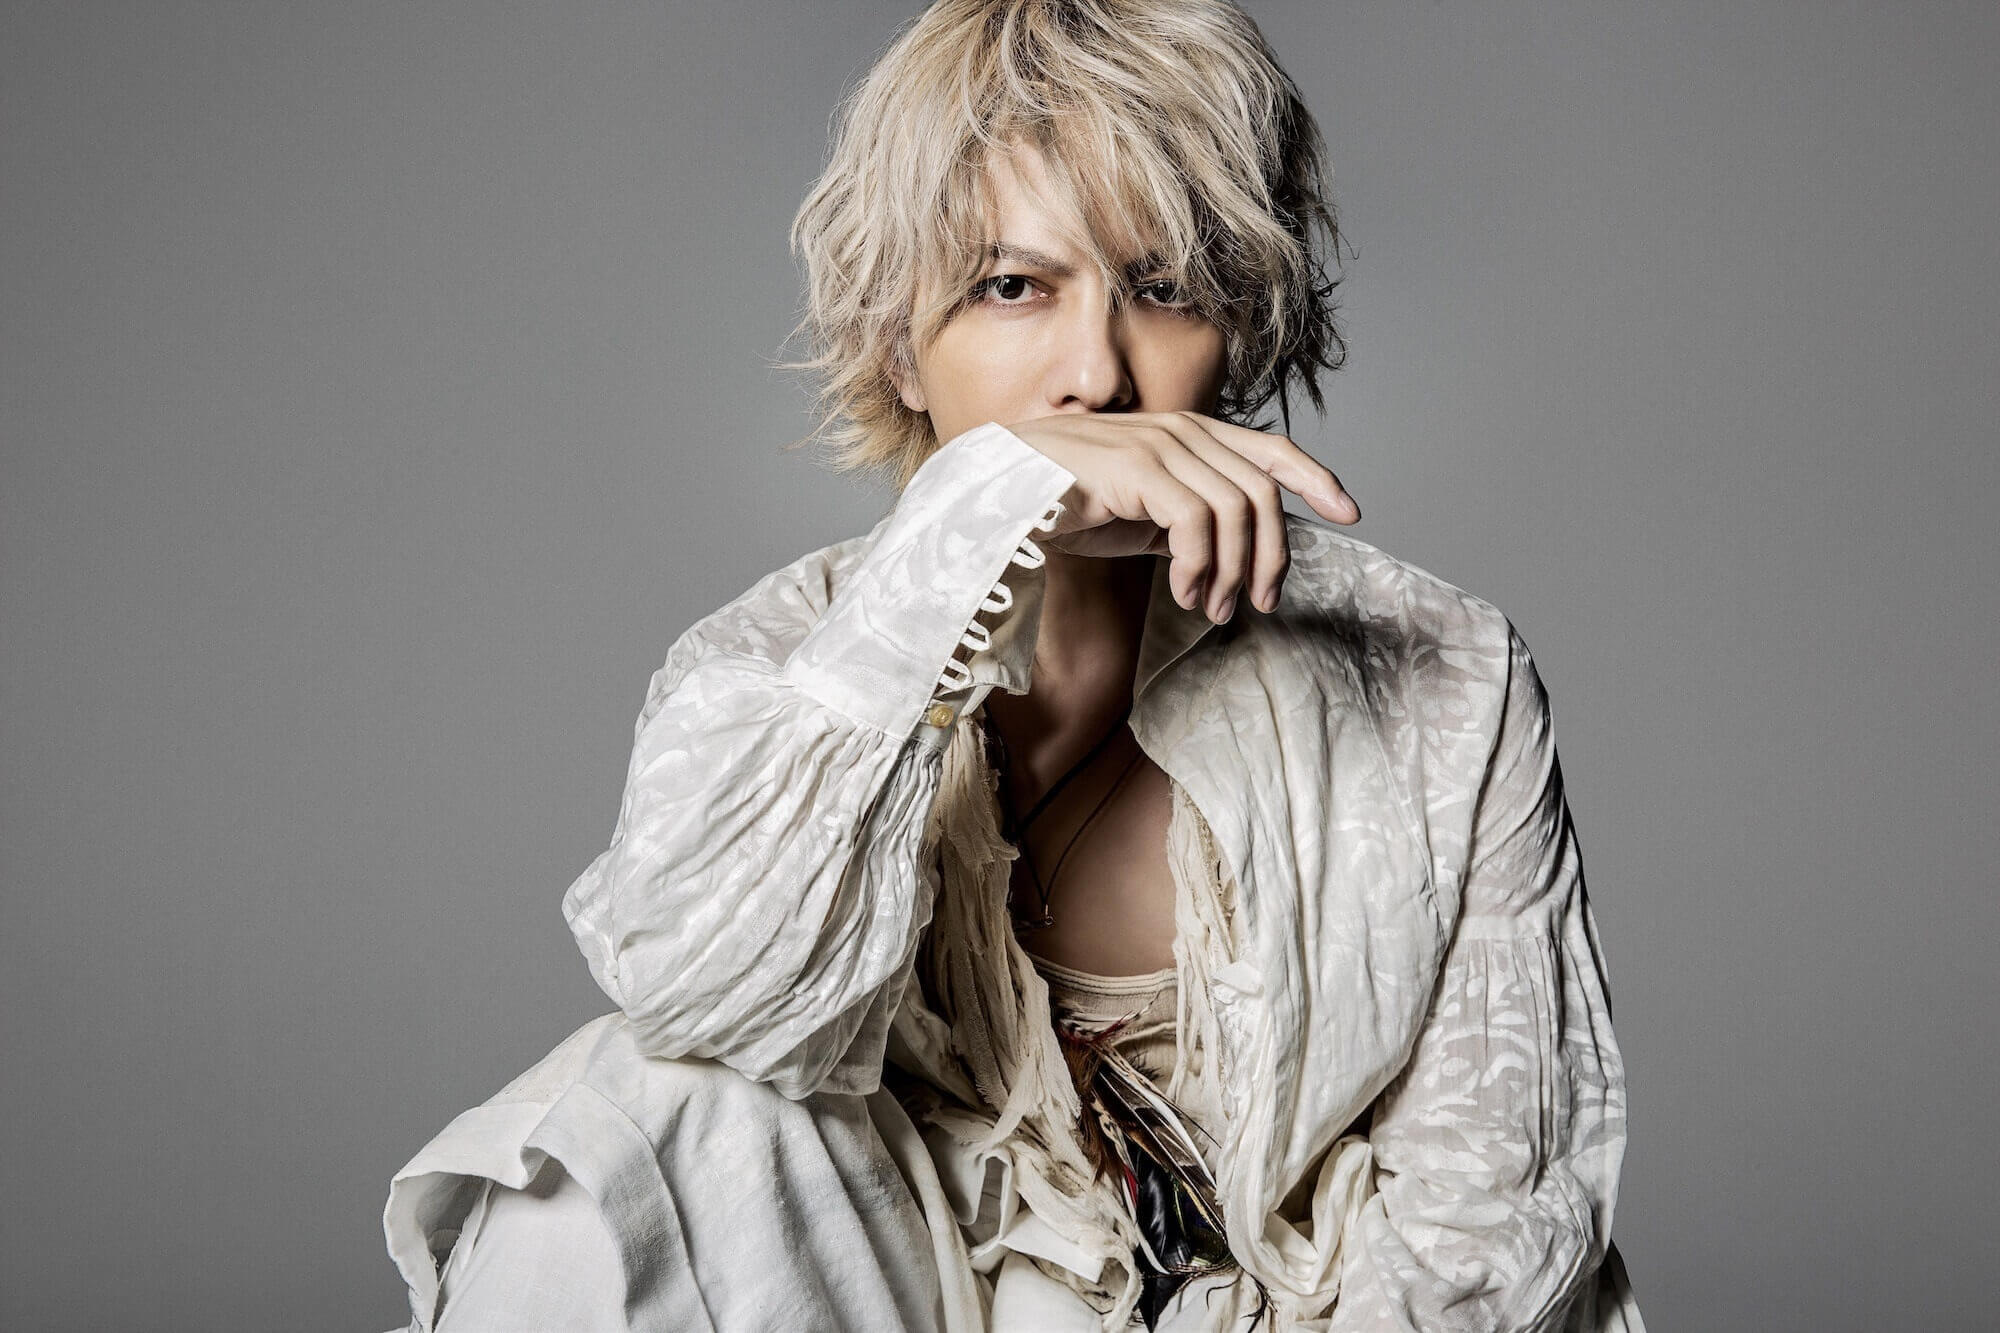 HYDE two new singles